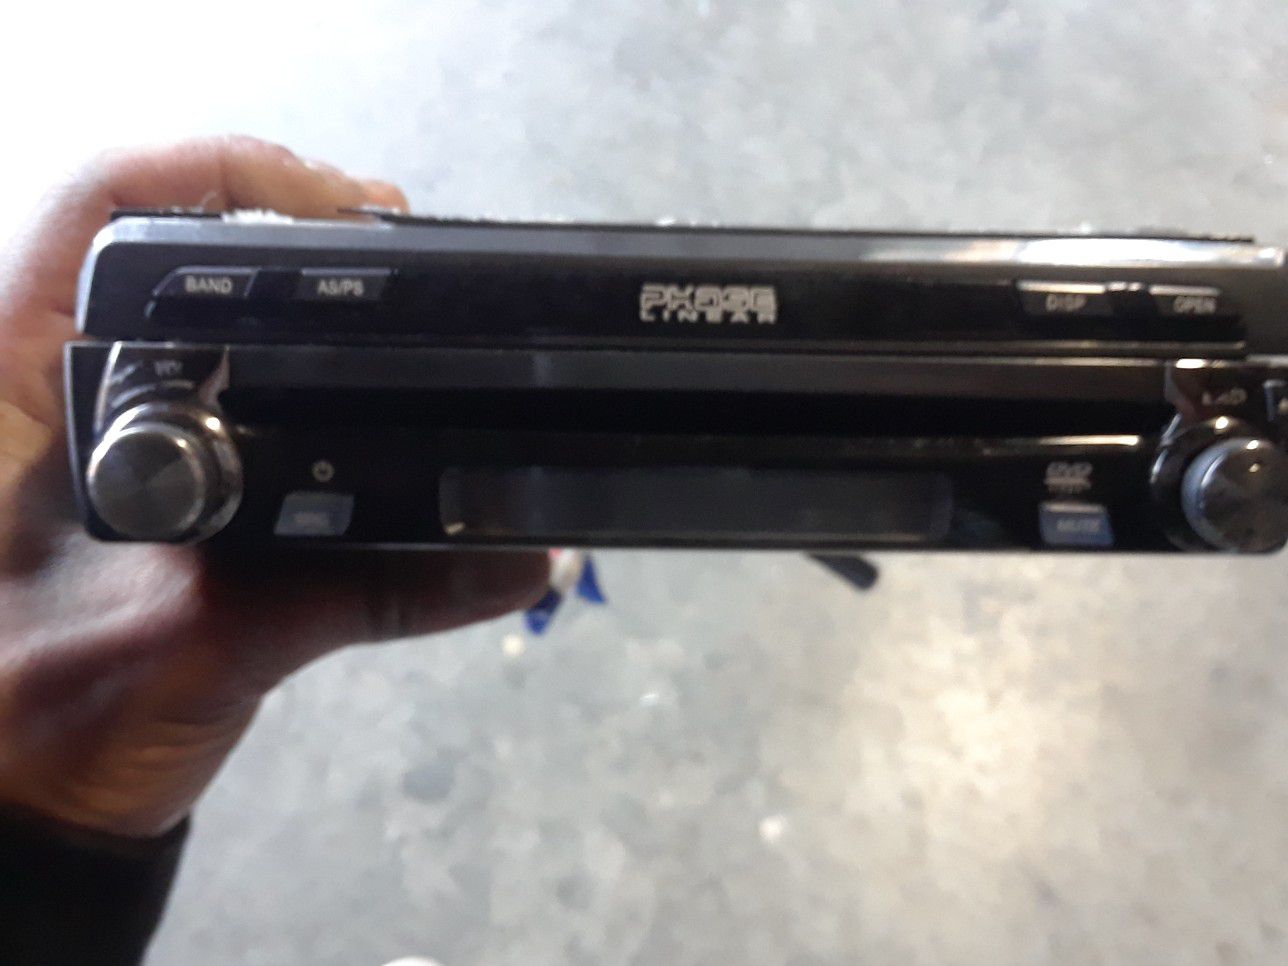 Phase Linear Cd/DVD player (touch screen)